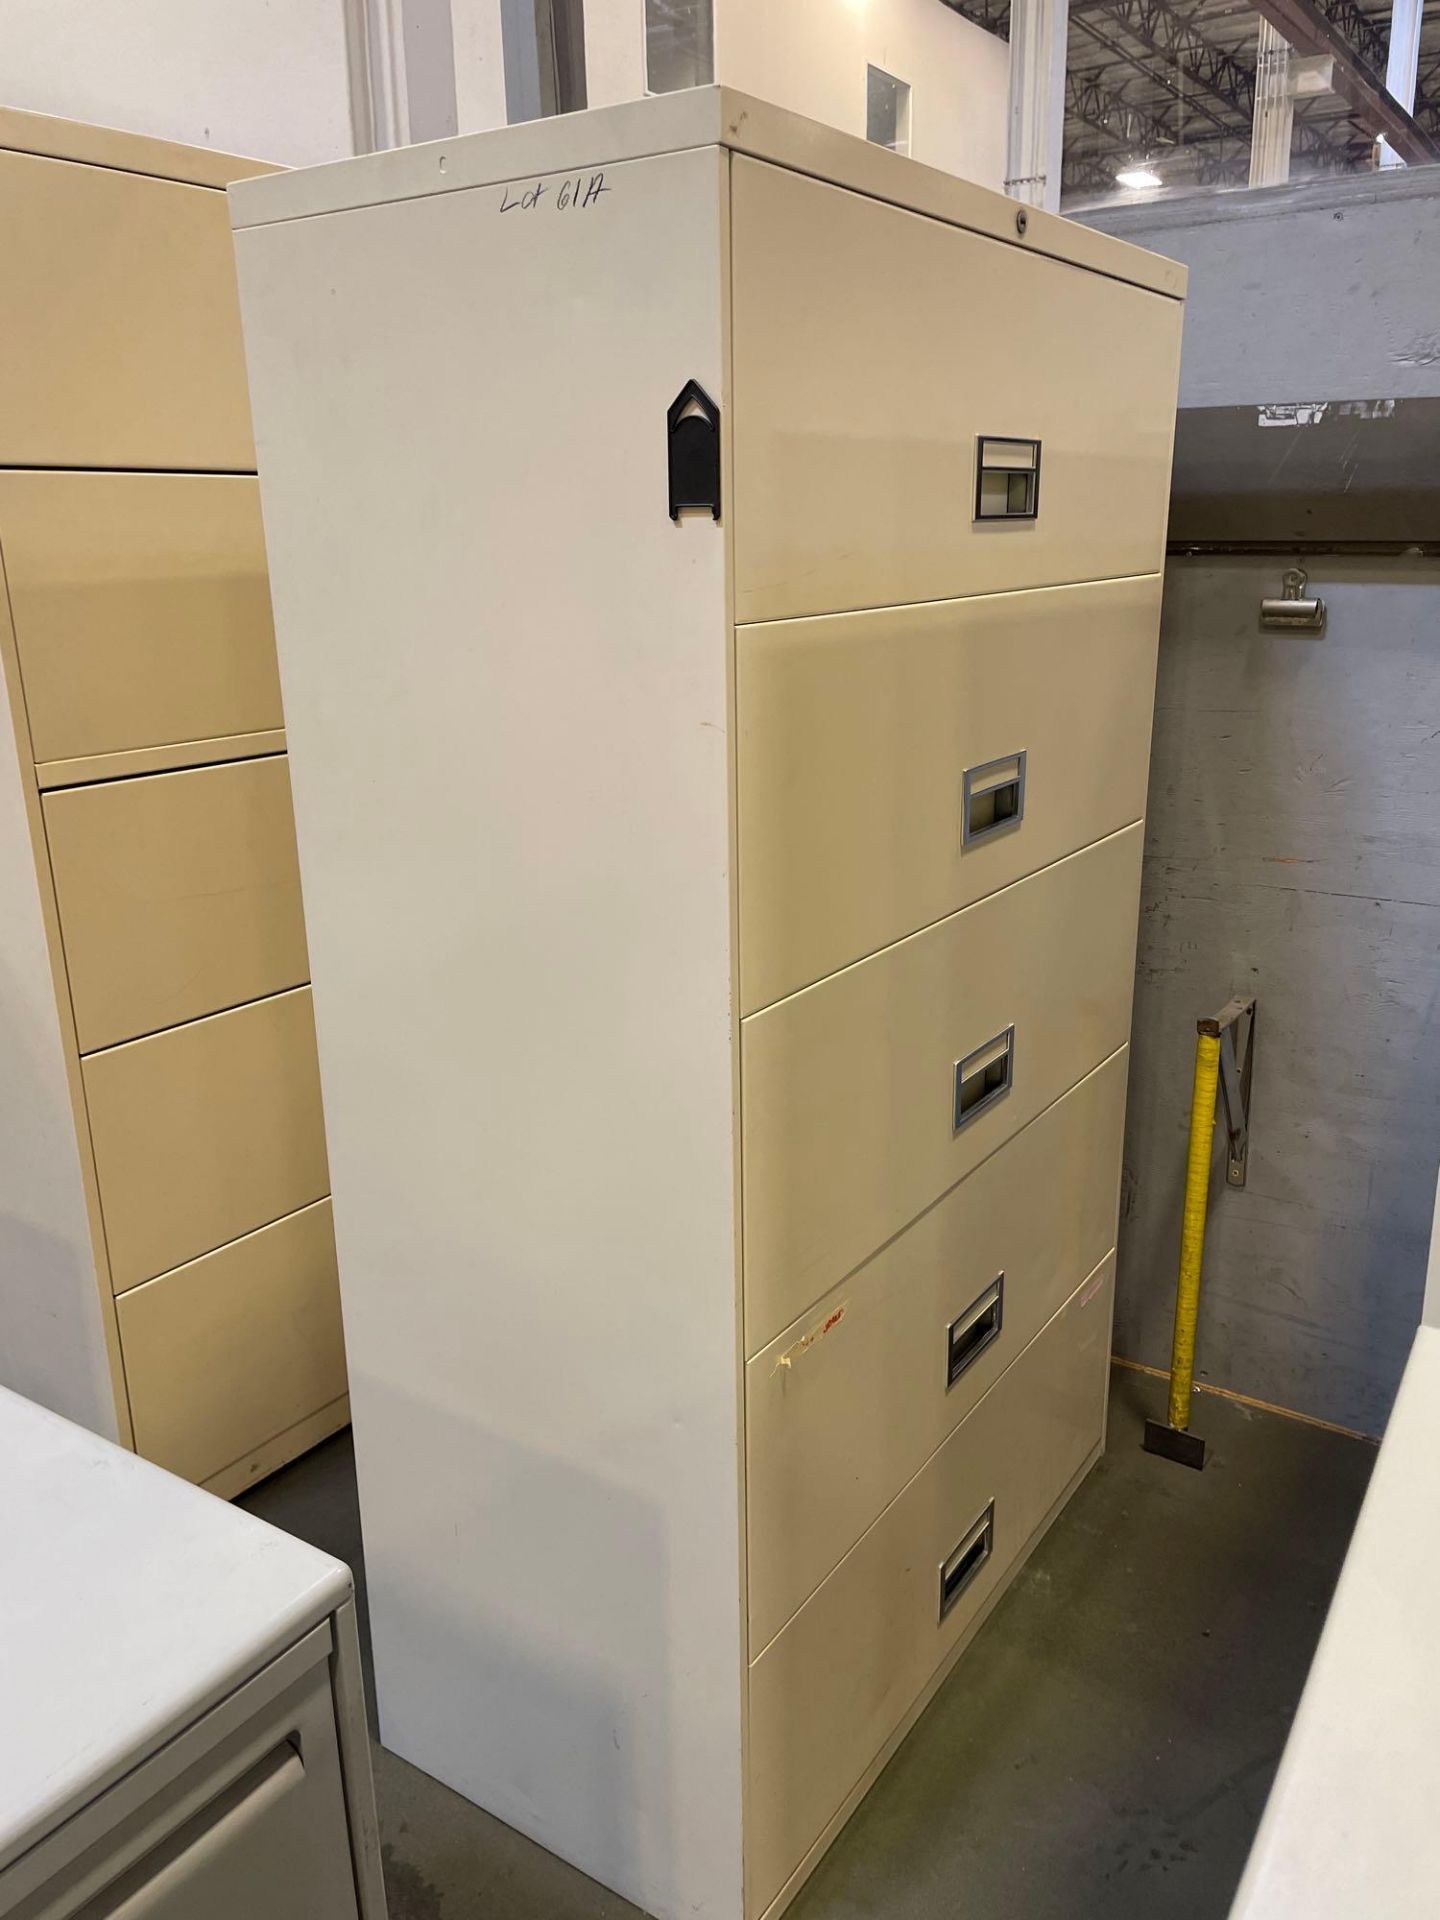 Lot of 5 File Cabinets, 5 Drawer: (4) 36" X 18" X 60", (1) 36" X 18" X 66" - Image 3 of 7